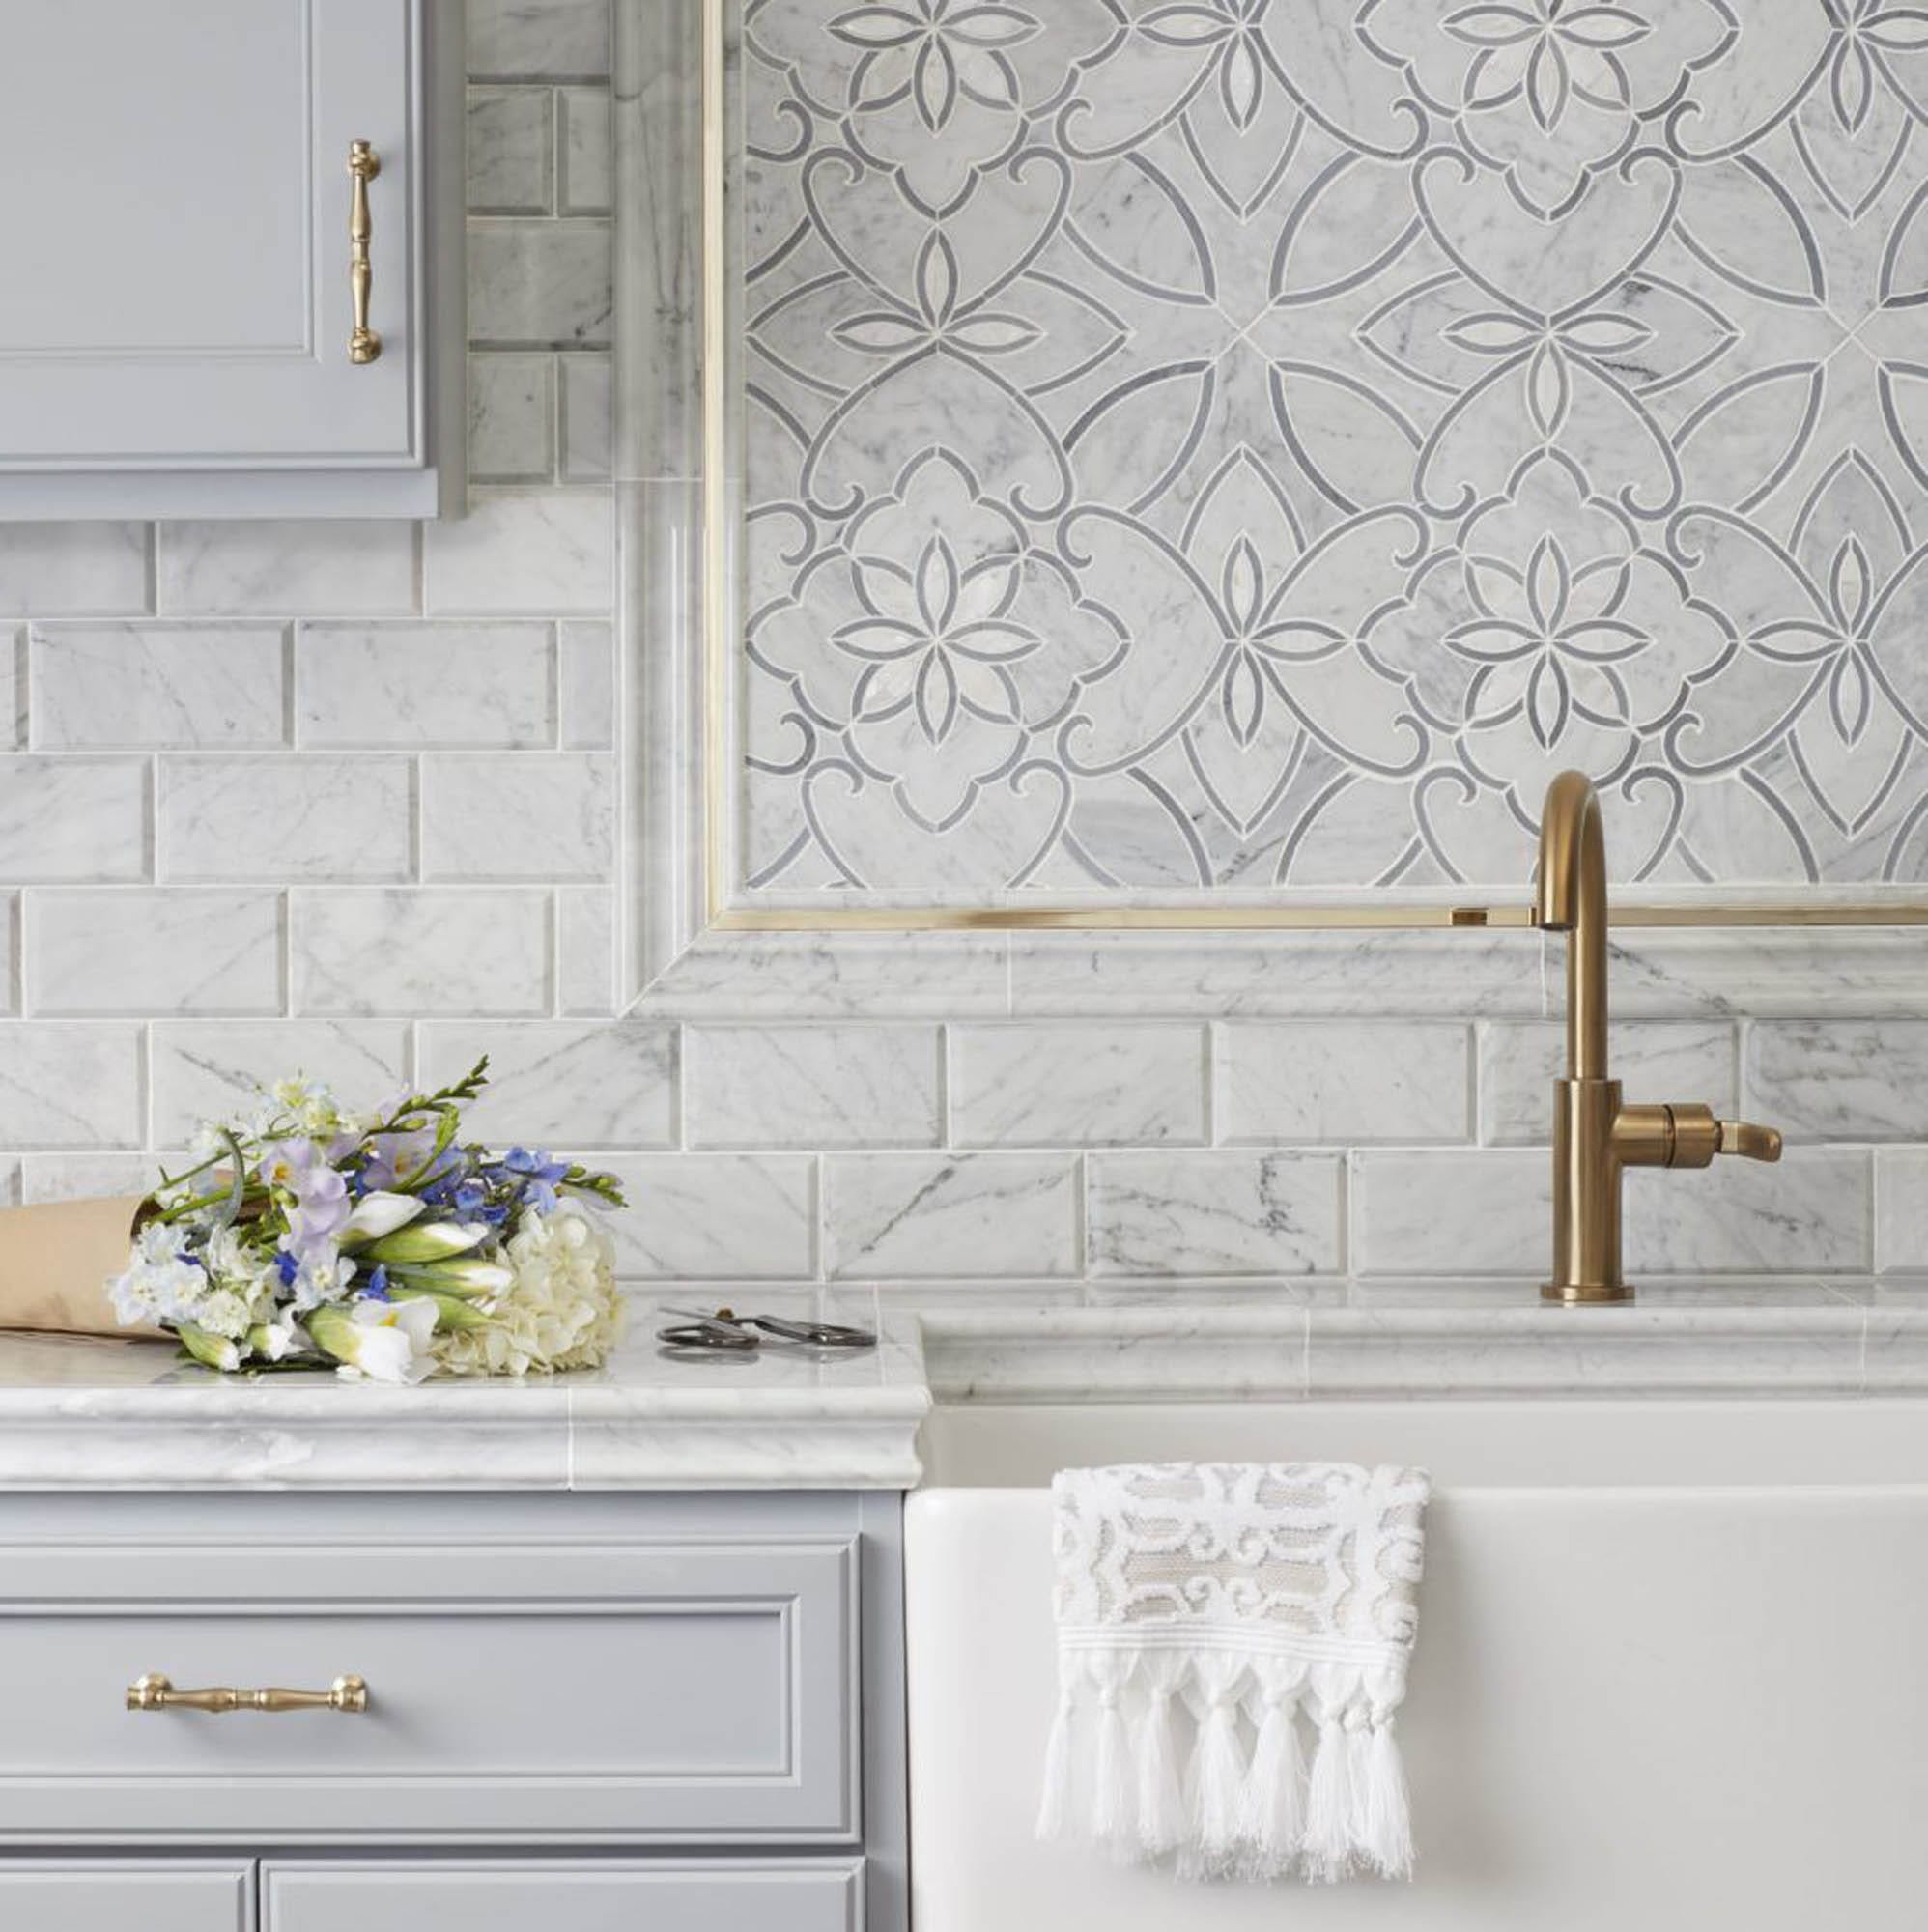 Subway tile with mosaic kitchen